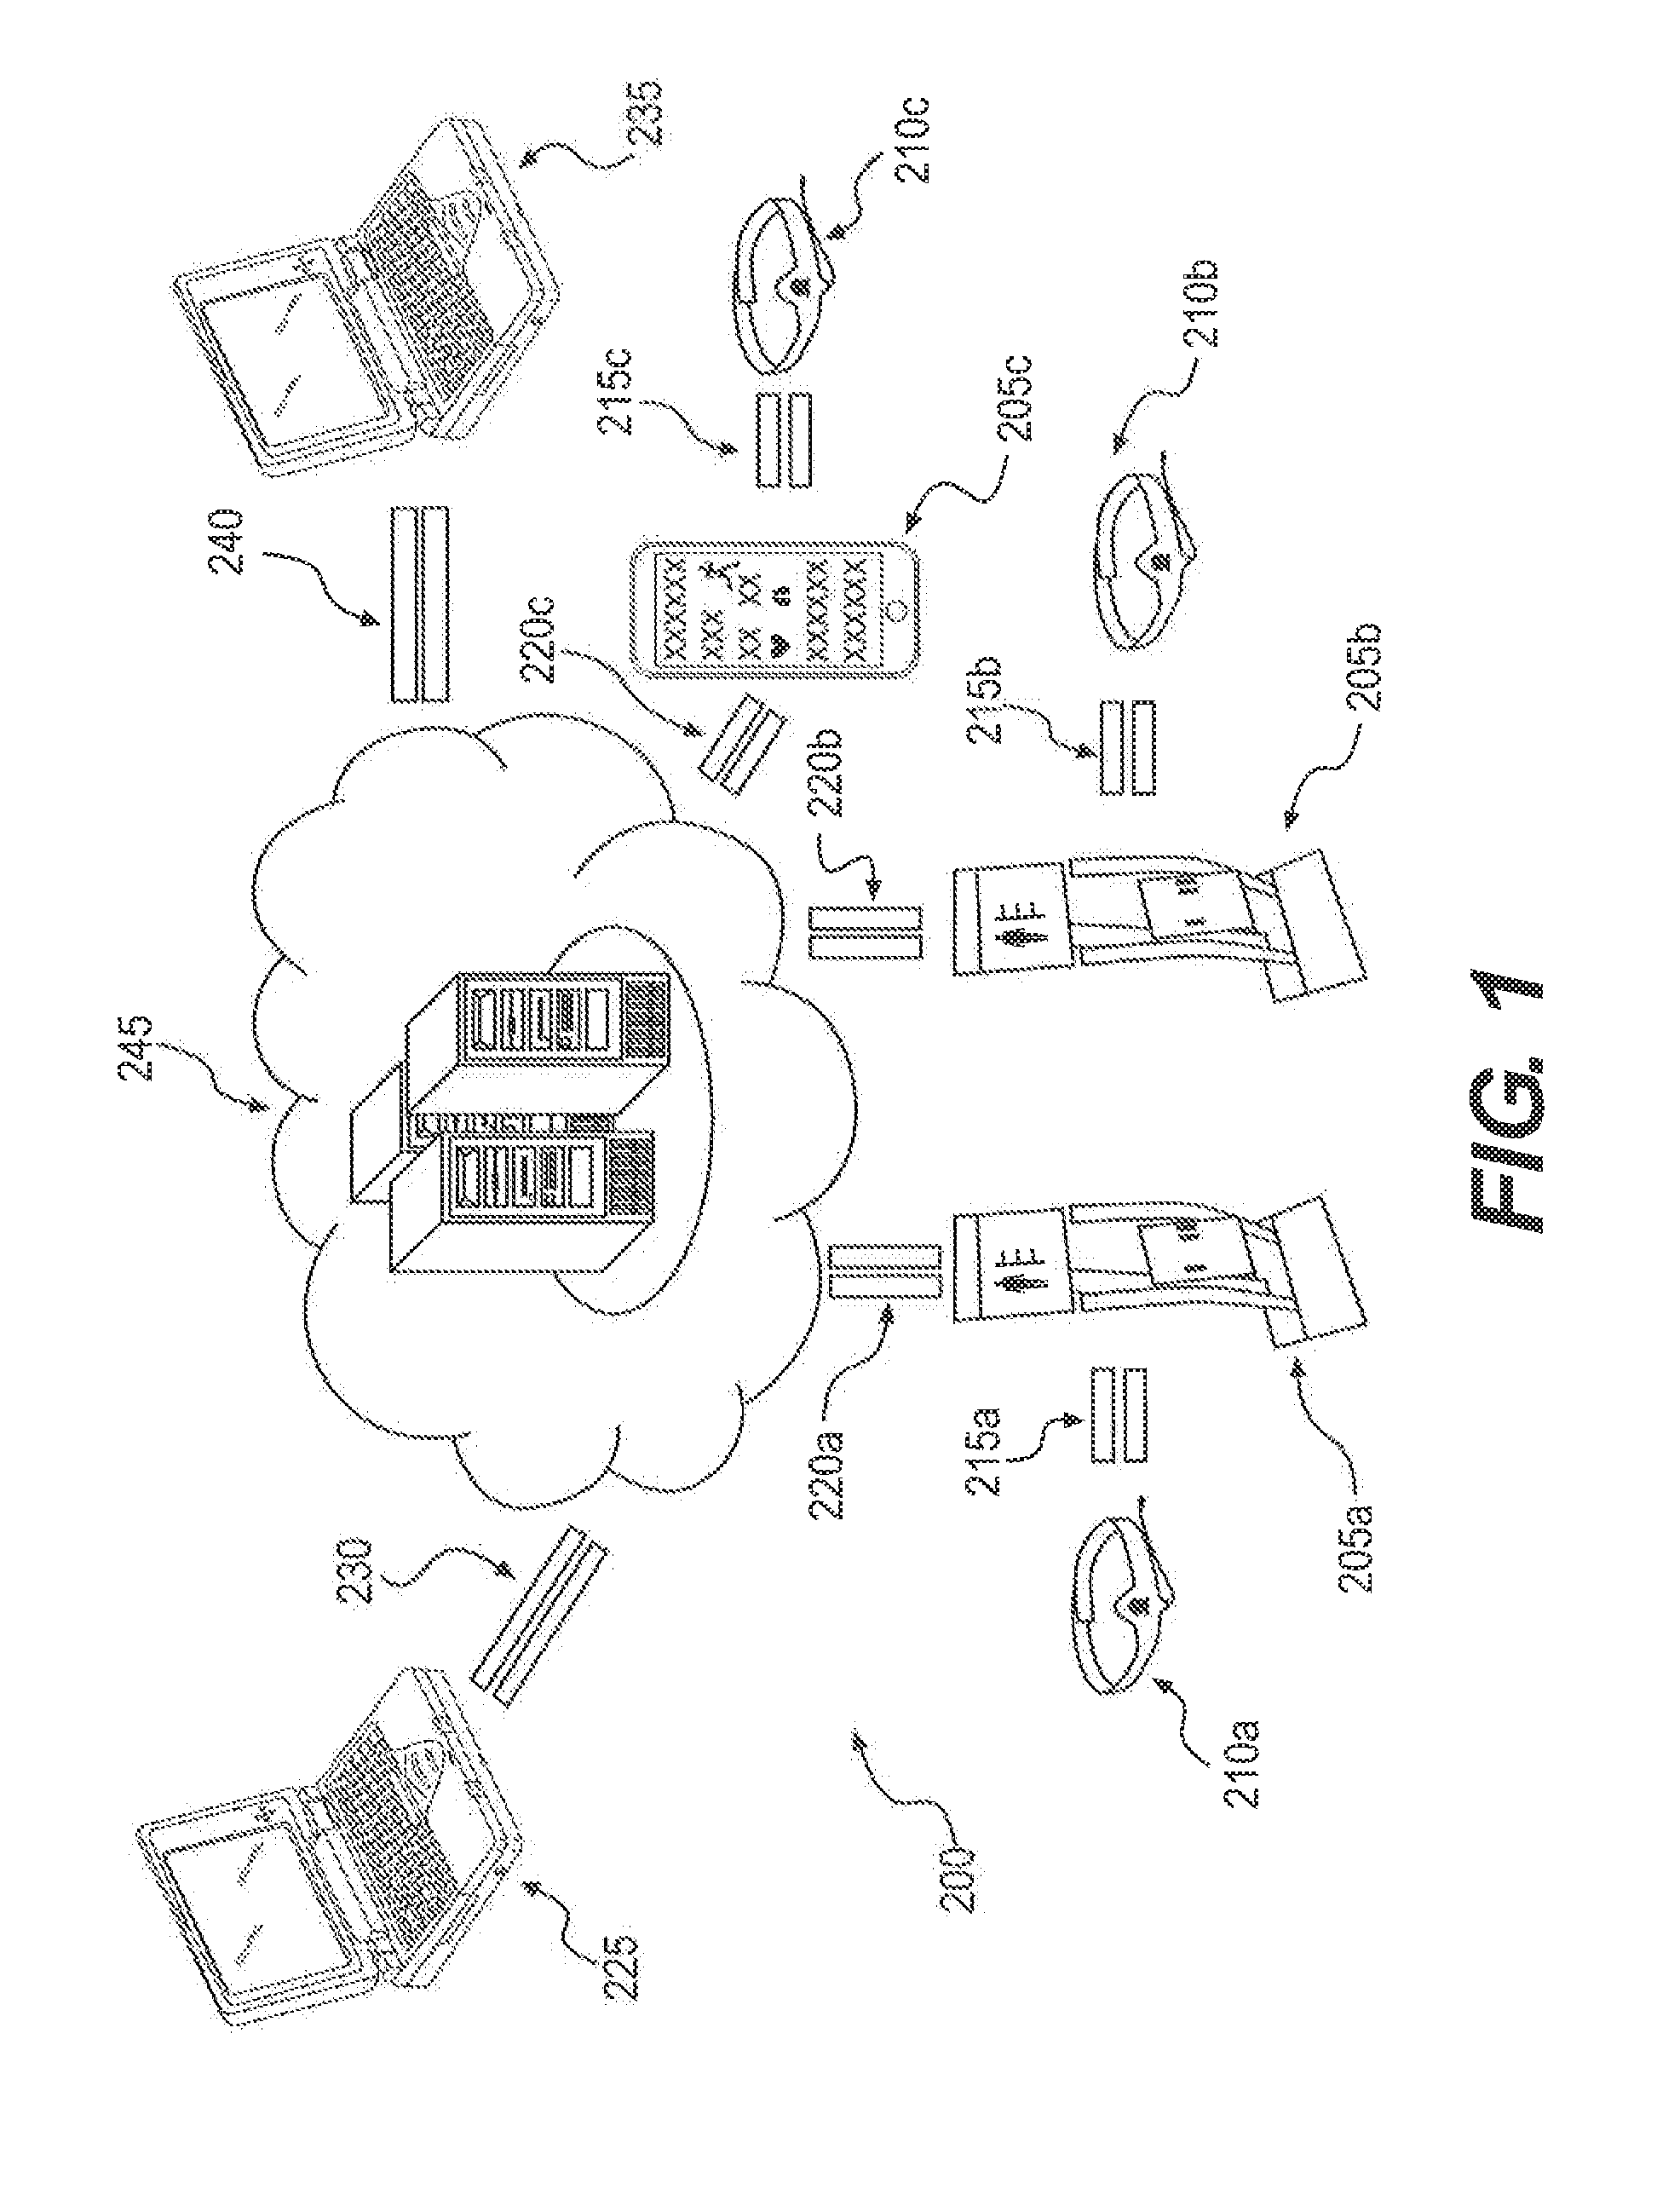 Method and System for Gathering and Computing an Audience's Neurologically-Based Reactions in a Distributed Framework Involving Remote Storage and Computing